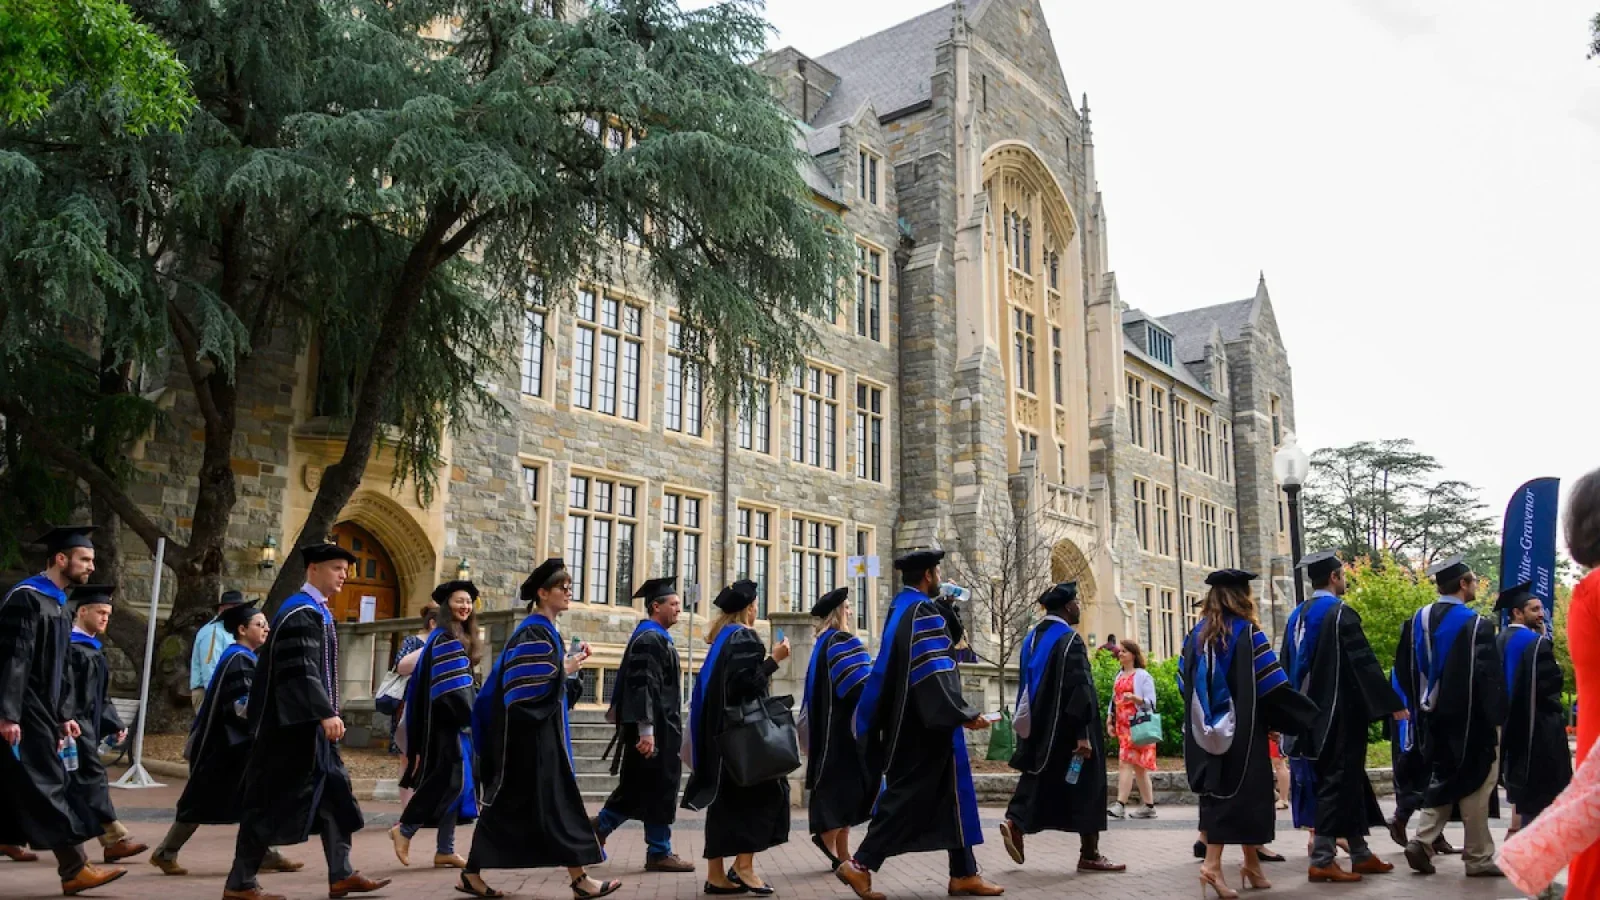 Students in academic robes walk past a stone building.